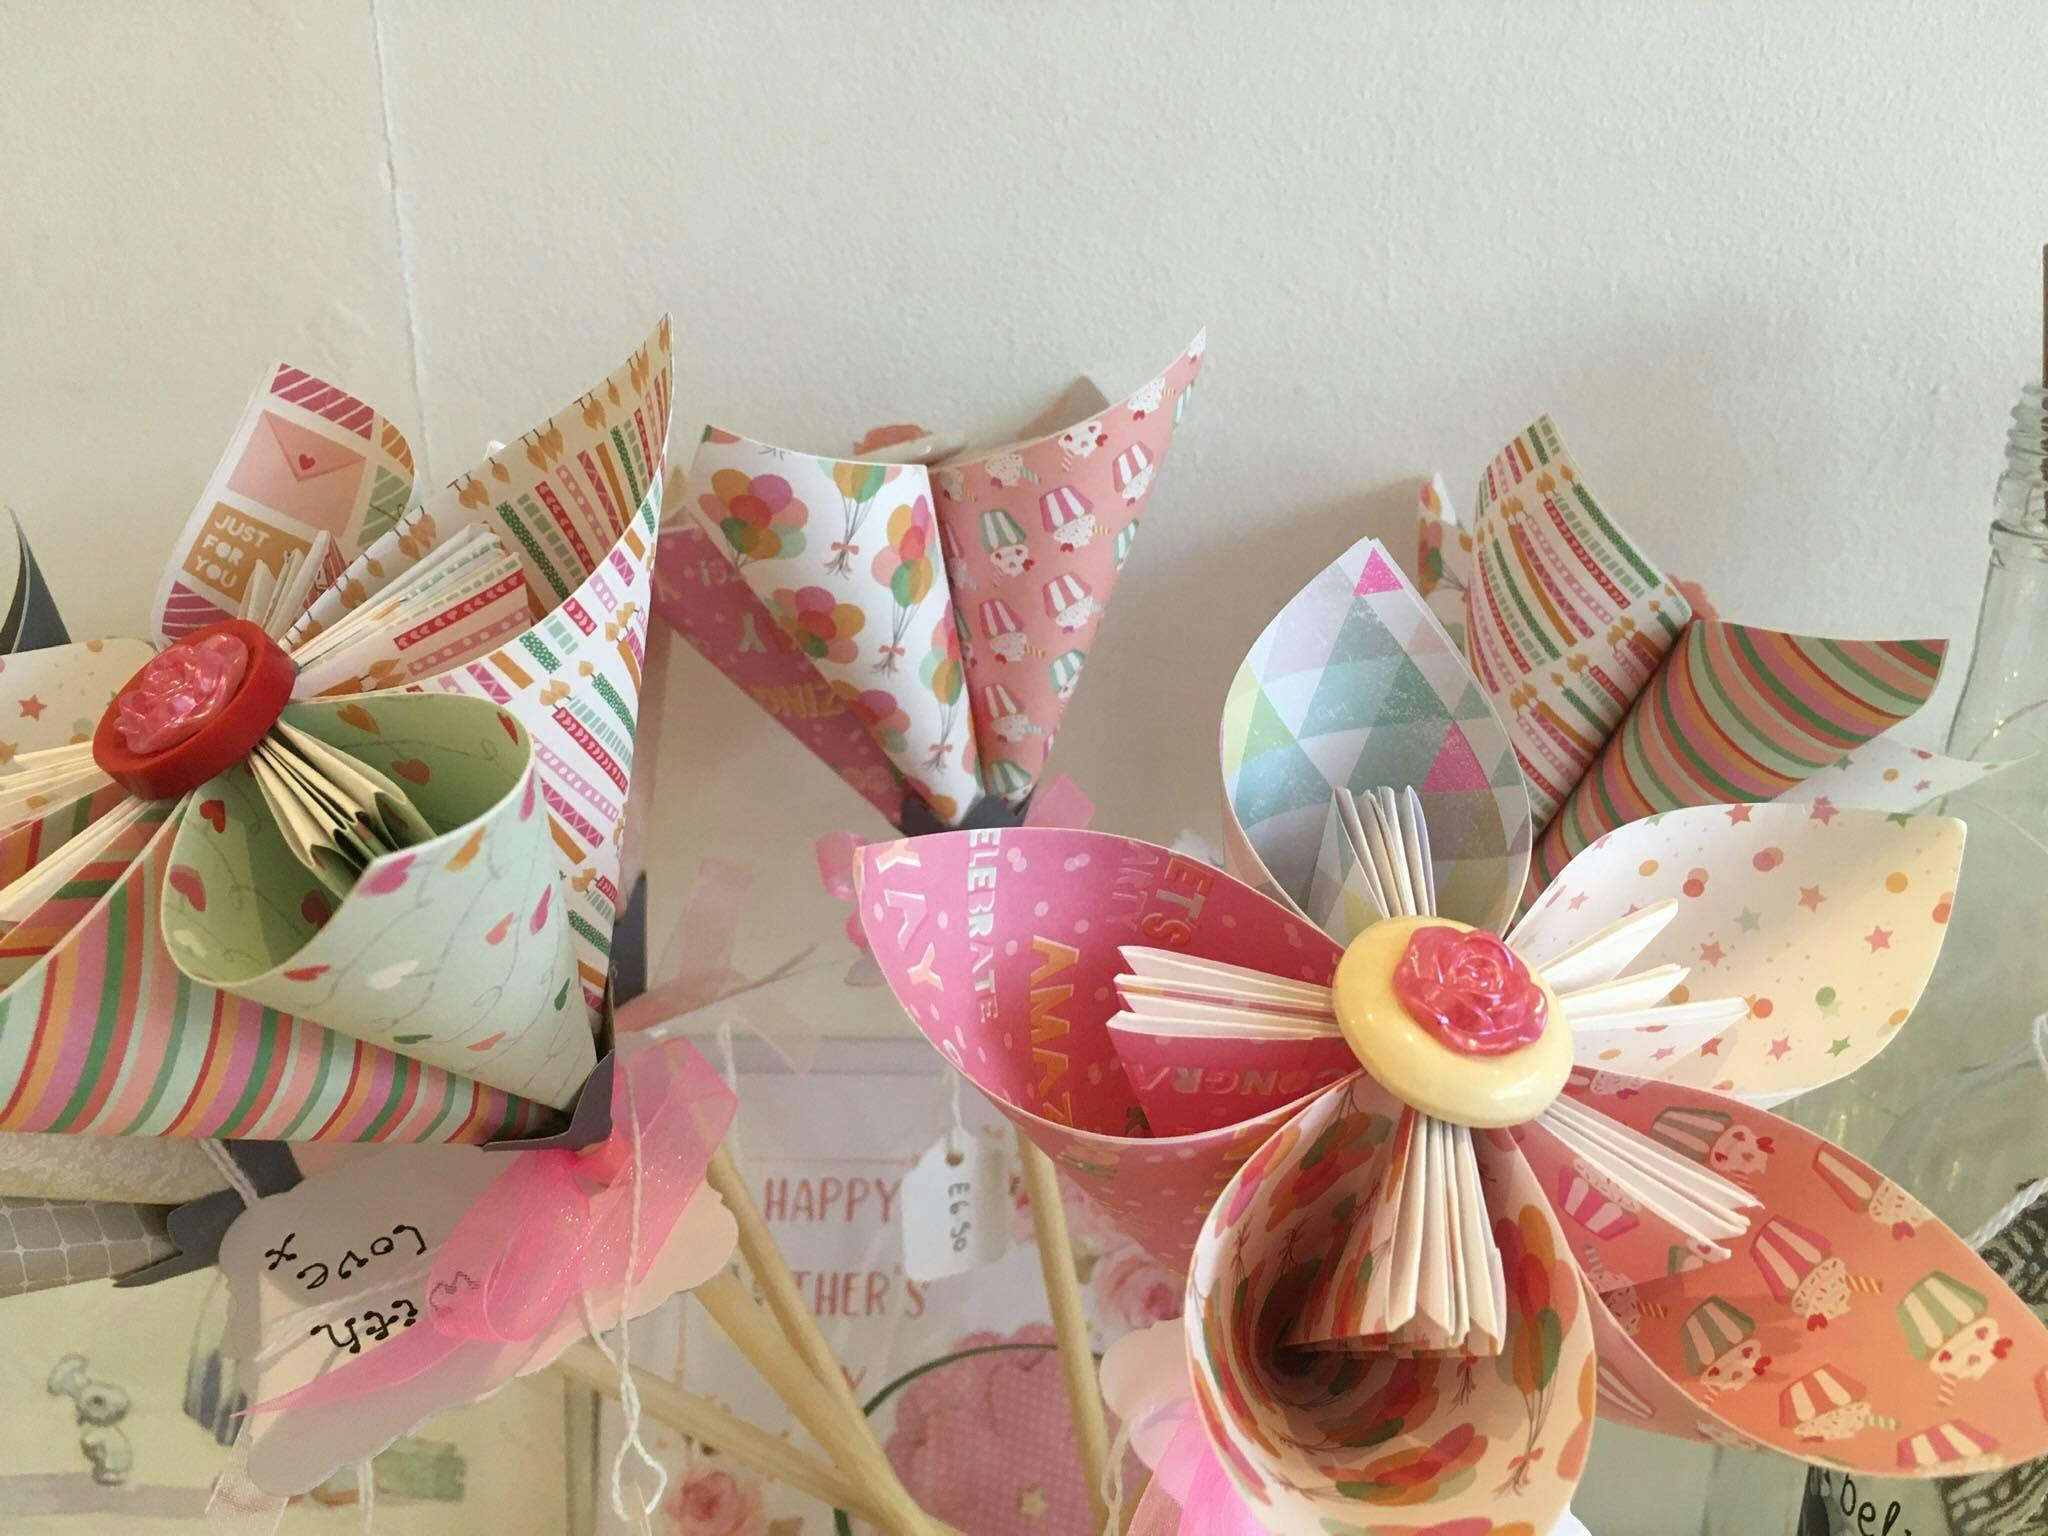 Paper flowers made from wrapping paper, a delightful example of different craft items on sale at THE SHOP